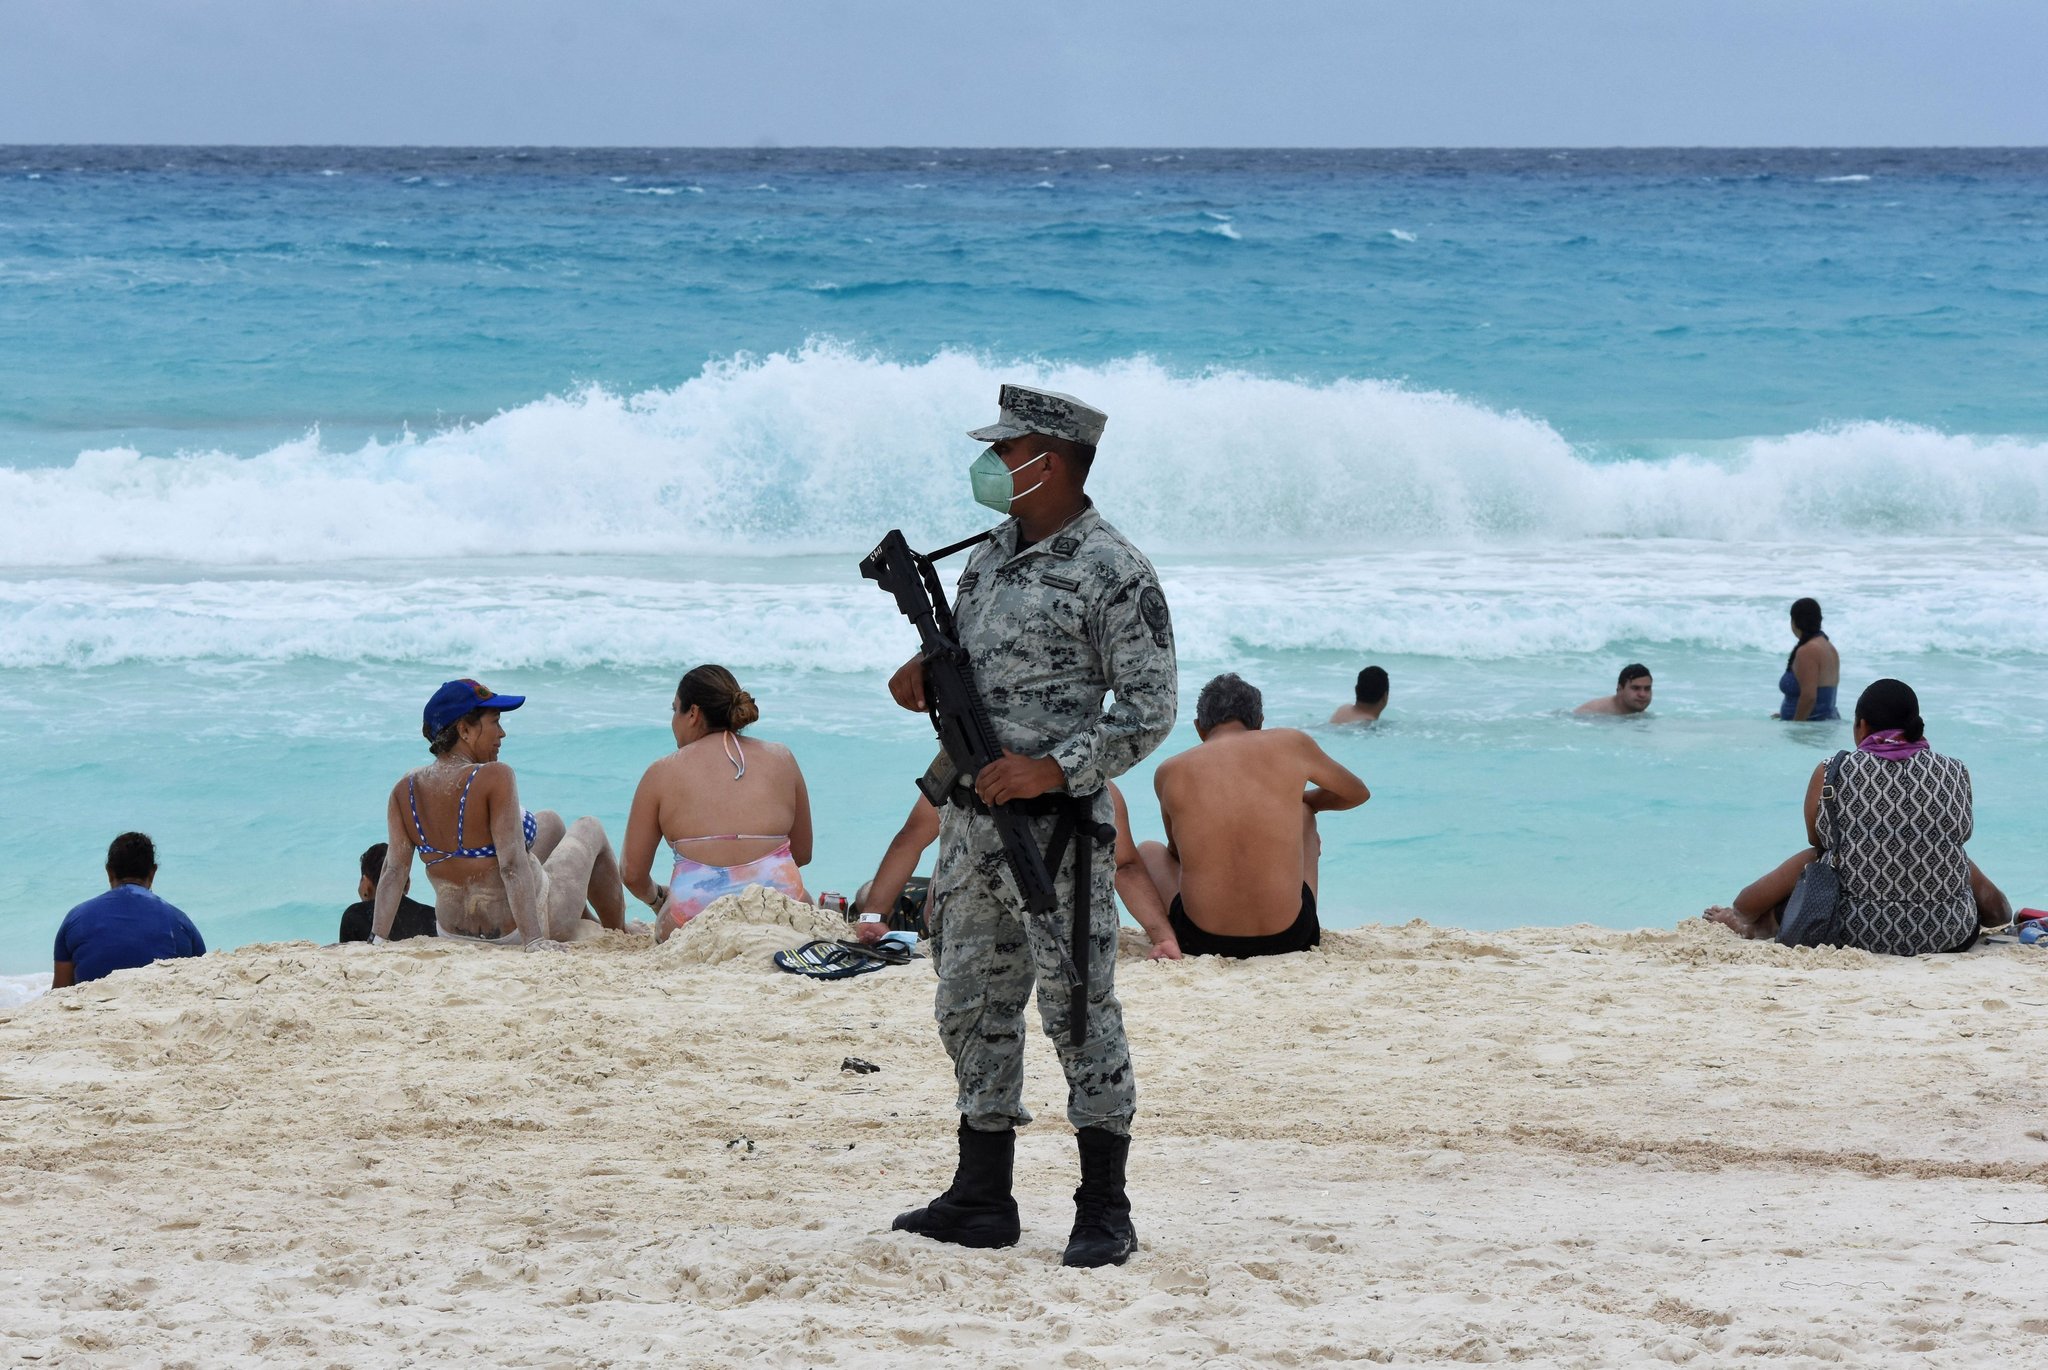 Is it safe to travel to Cancun? Advice after deadly shooting